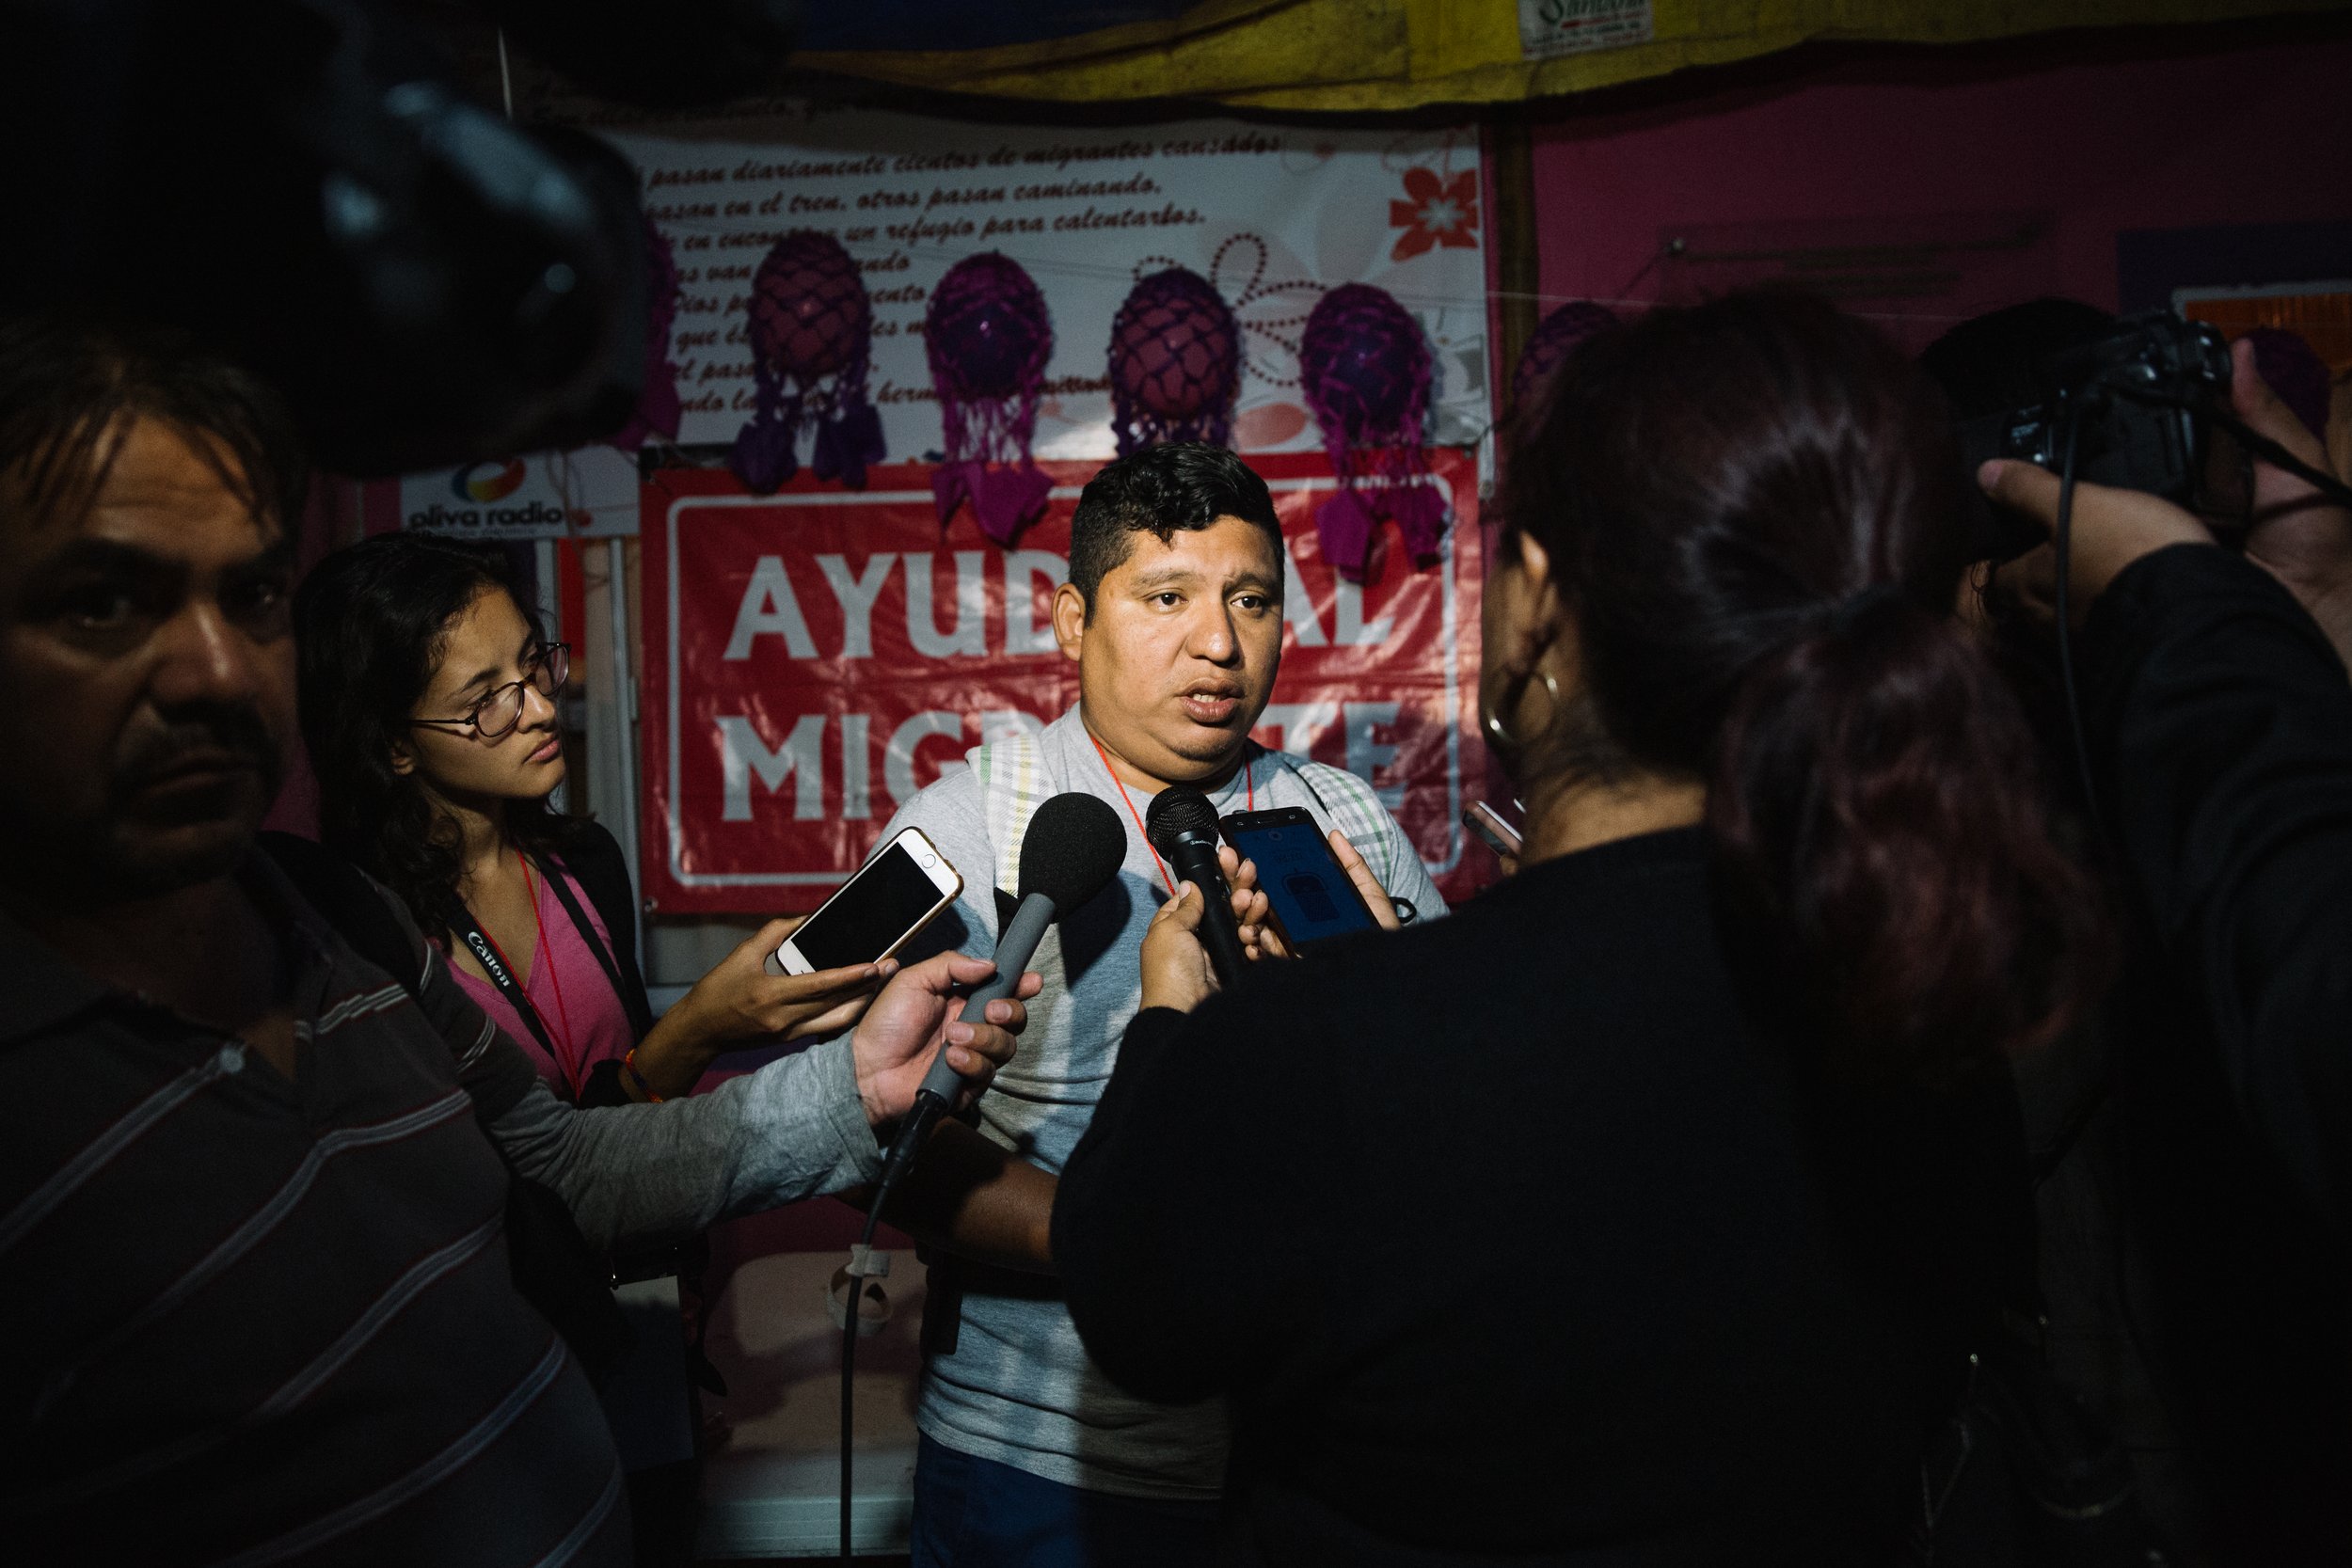  Organizer Ruben Figueroa speaks to reporters after the successful reunion of two sisters in Las Patronas, Veracruz, Mexico. The sisters had been separated for over 37 years, and their emotional reunion was a testament to the importance of the work b